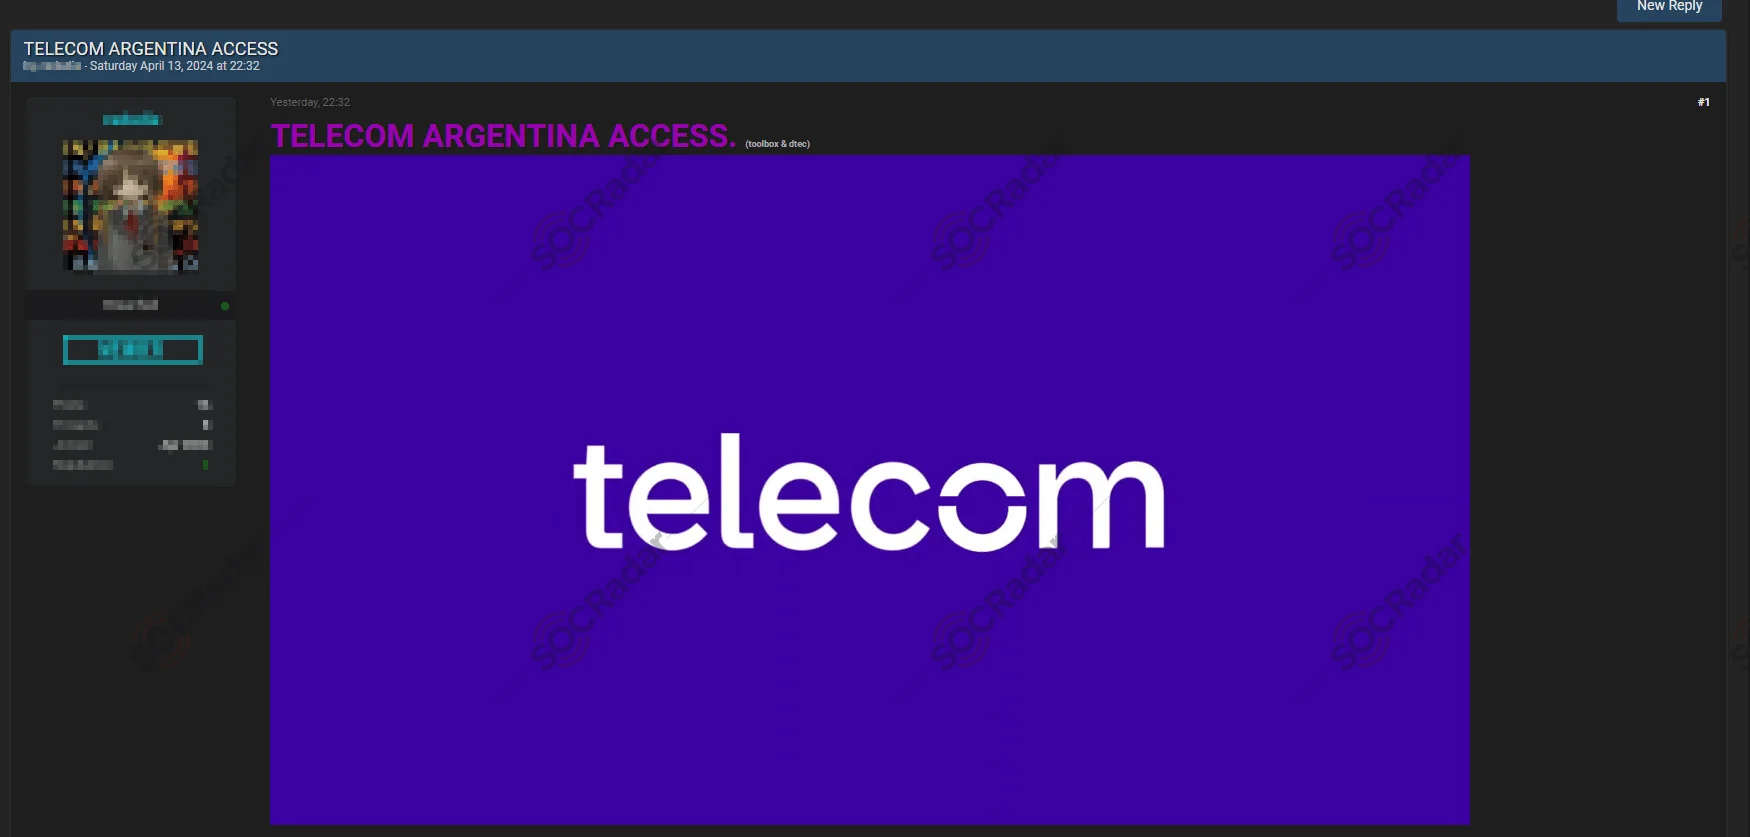 Unauthorized Network Access Sale is Detected for an Argentinian Telecommunication Company